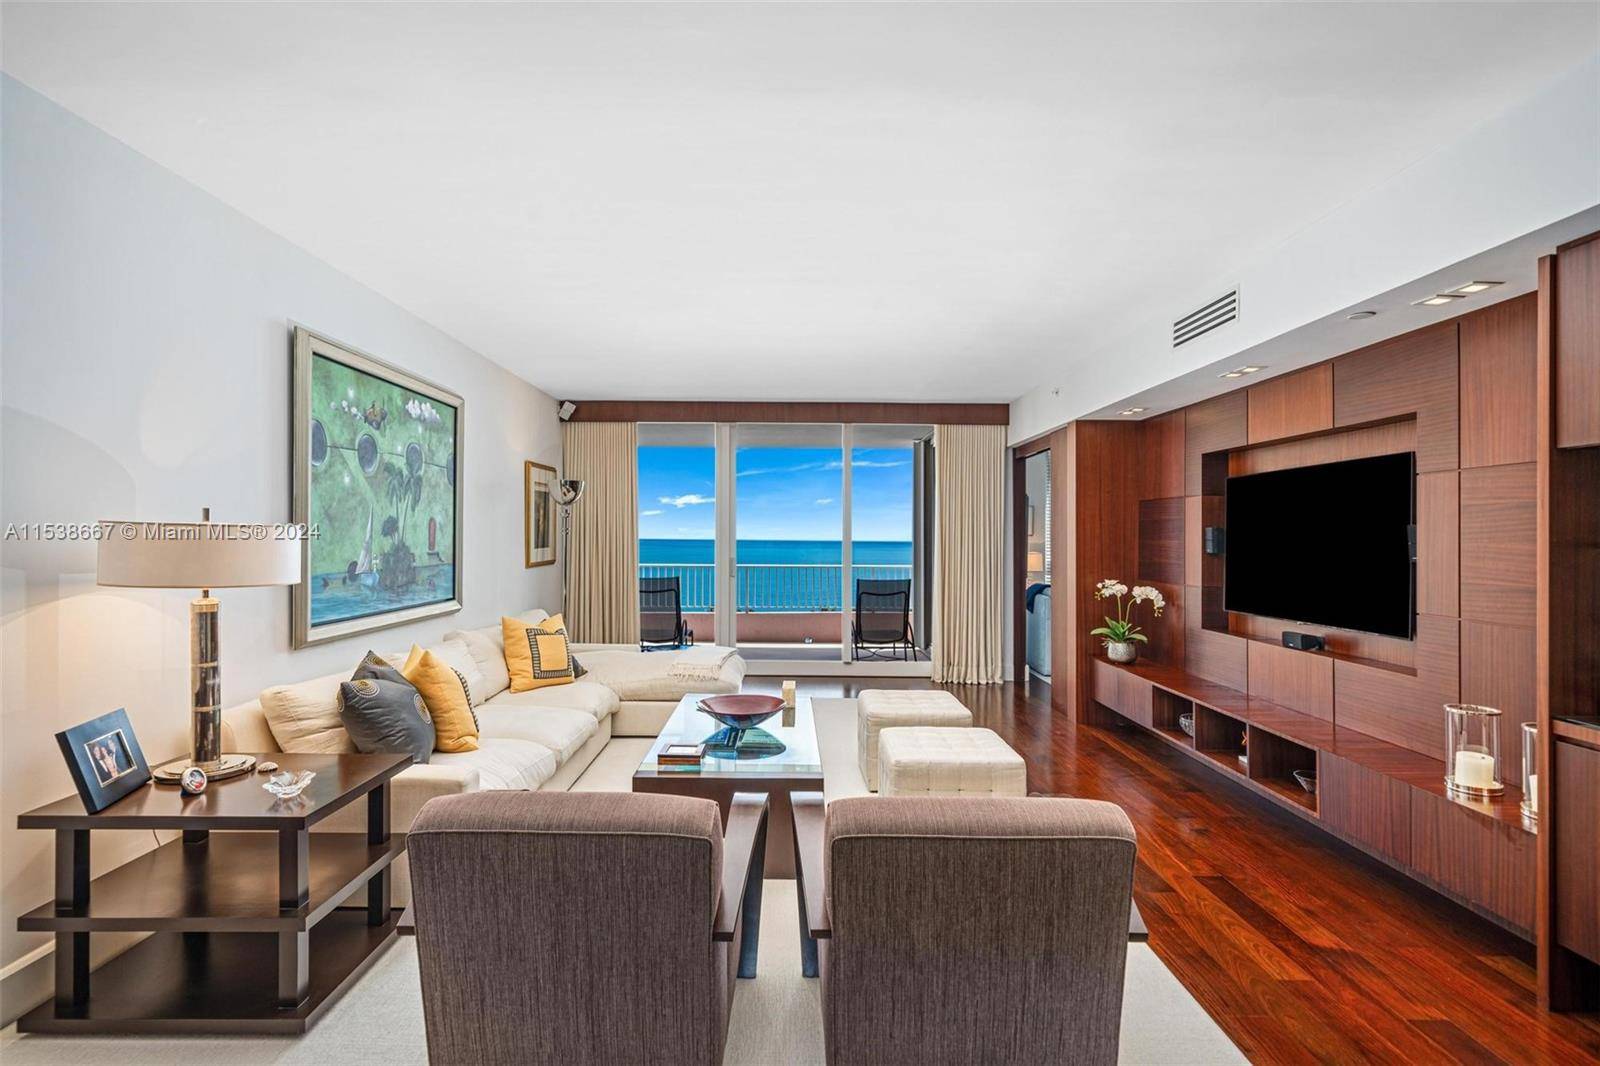 Welcome to this exquisite residence at Ocean Club, boasting unobstructed views of the ocean, Biscayne Bay city skyline.